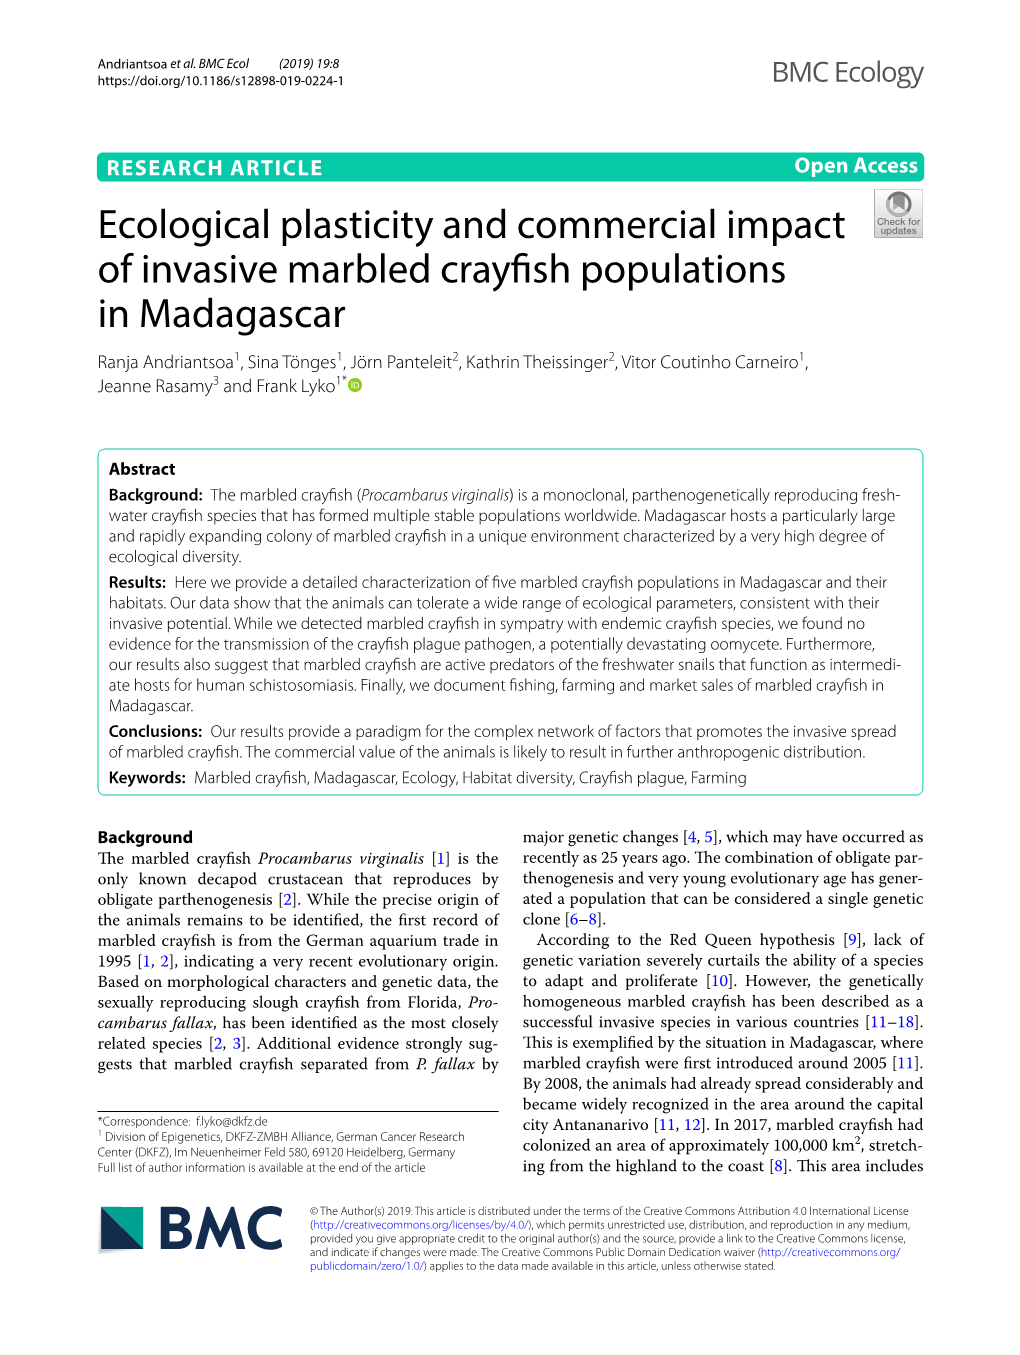 Ecological Plasticity and Commercial Impact of Invasive Marbled Crayfish